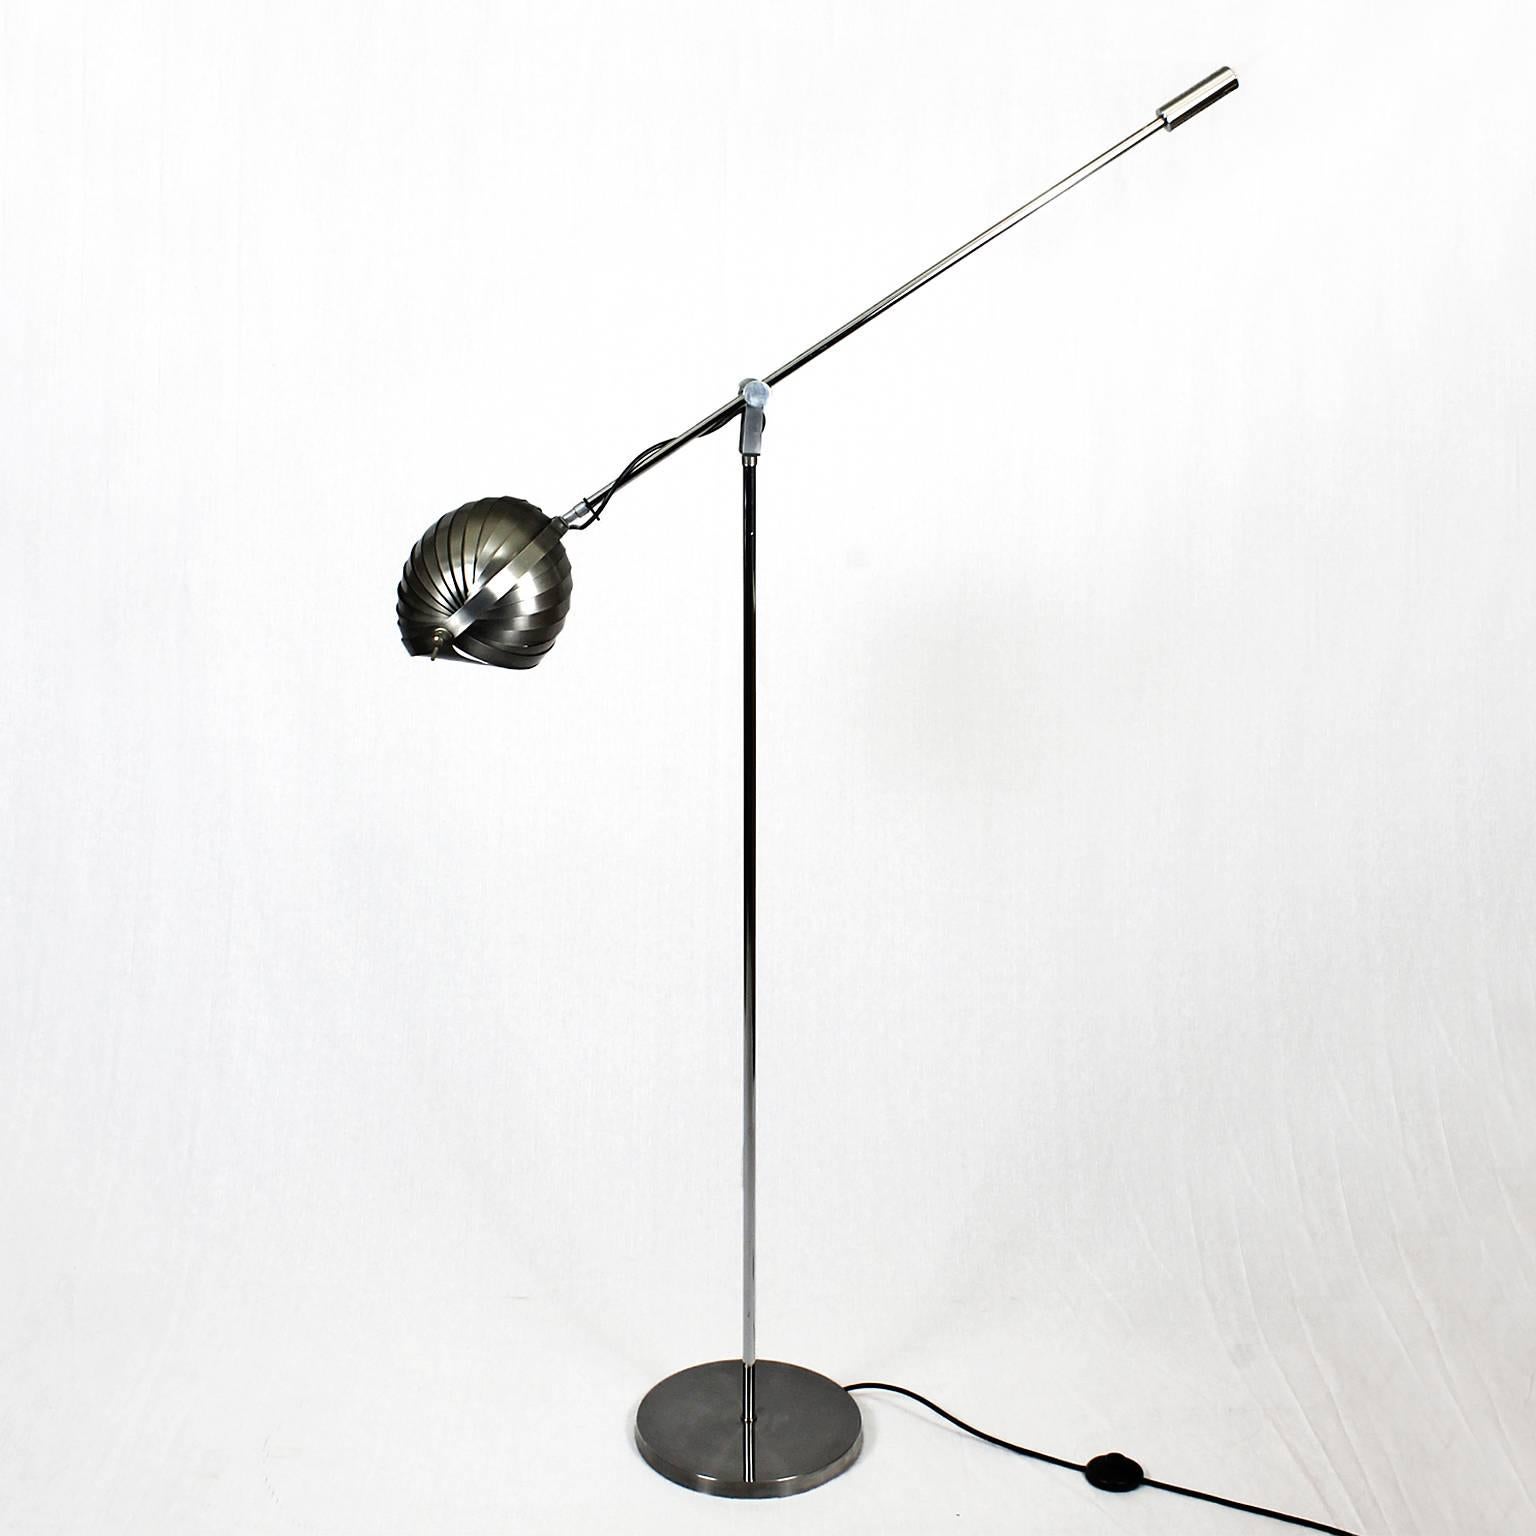 Standing lamp, counterbalance system, chrome-plated metal and brushed steel, orientable lampshade.

In the style of Henri Mathieu,

France, circa 1960.